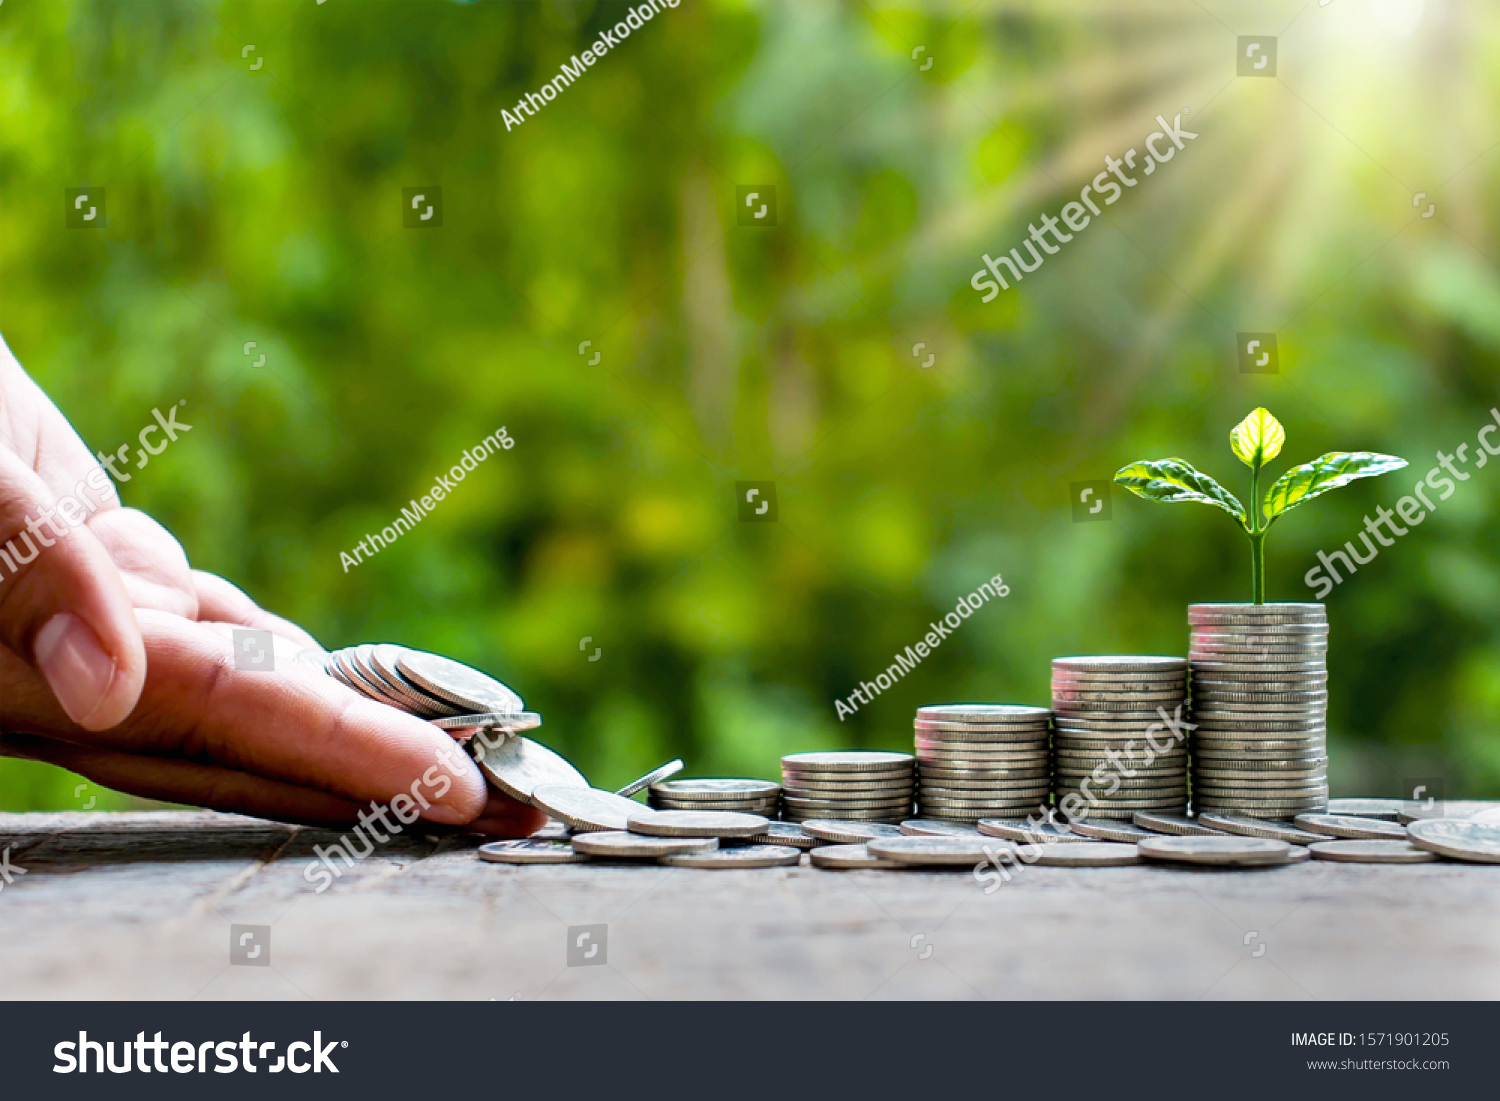 Small tree that grows at various levels of coins, financial concepts, saving money and investing. #1571901205